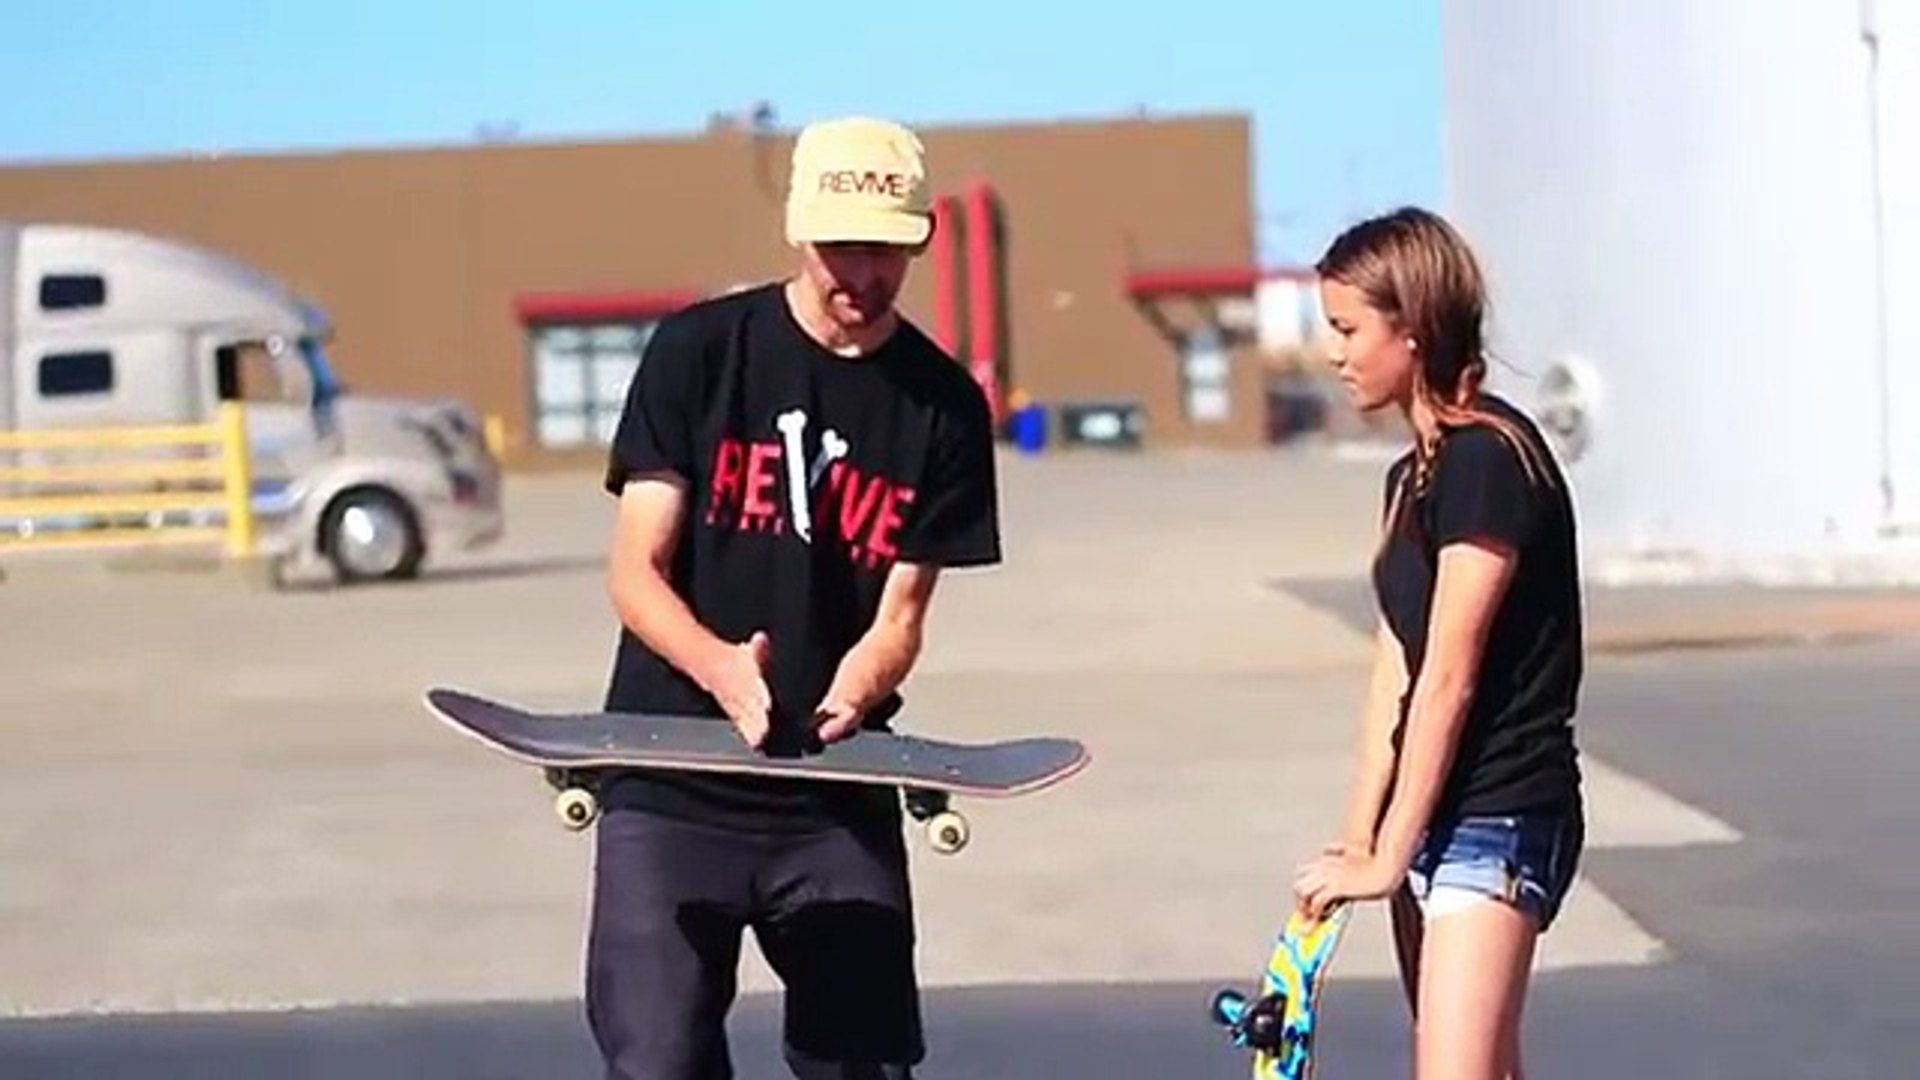 GIRL LEARNS HER FIRST SKATEBOARD TRICKS. EP 3 OLLIE FIRST STEPS